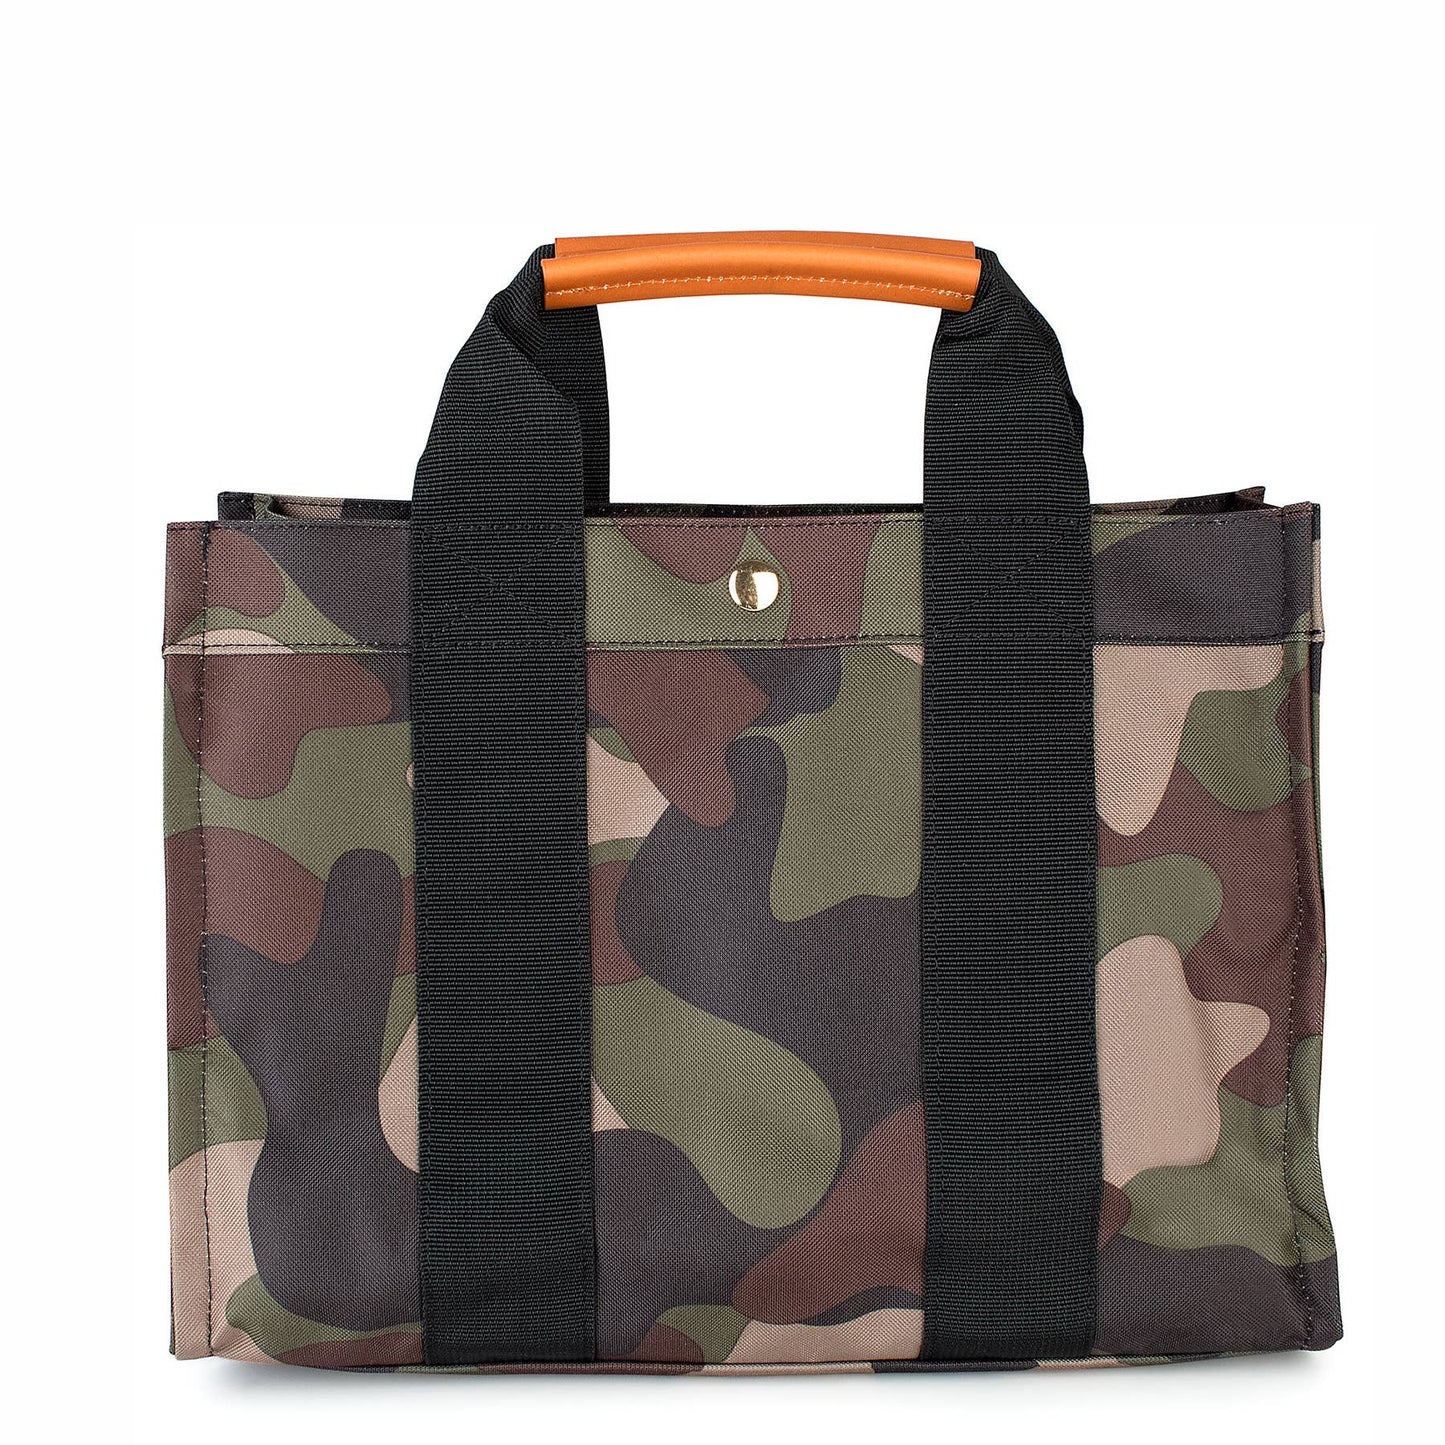 kylie camo nylon tote with leather accents